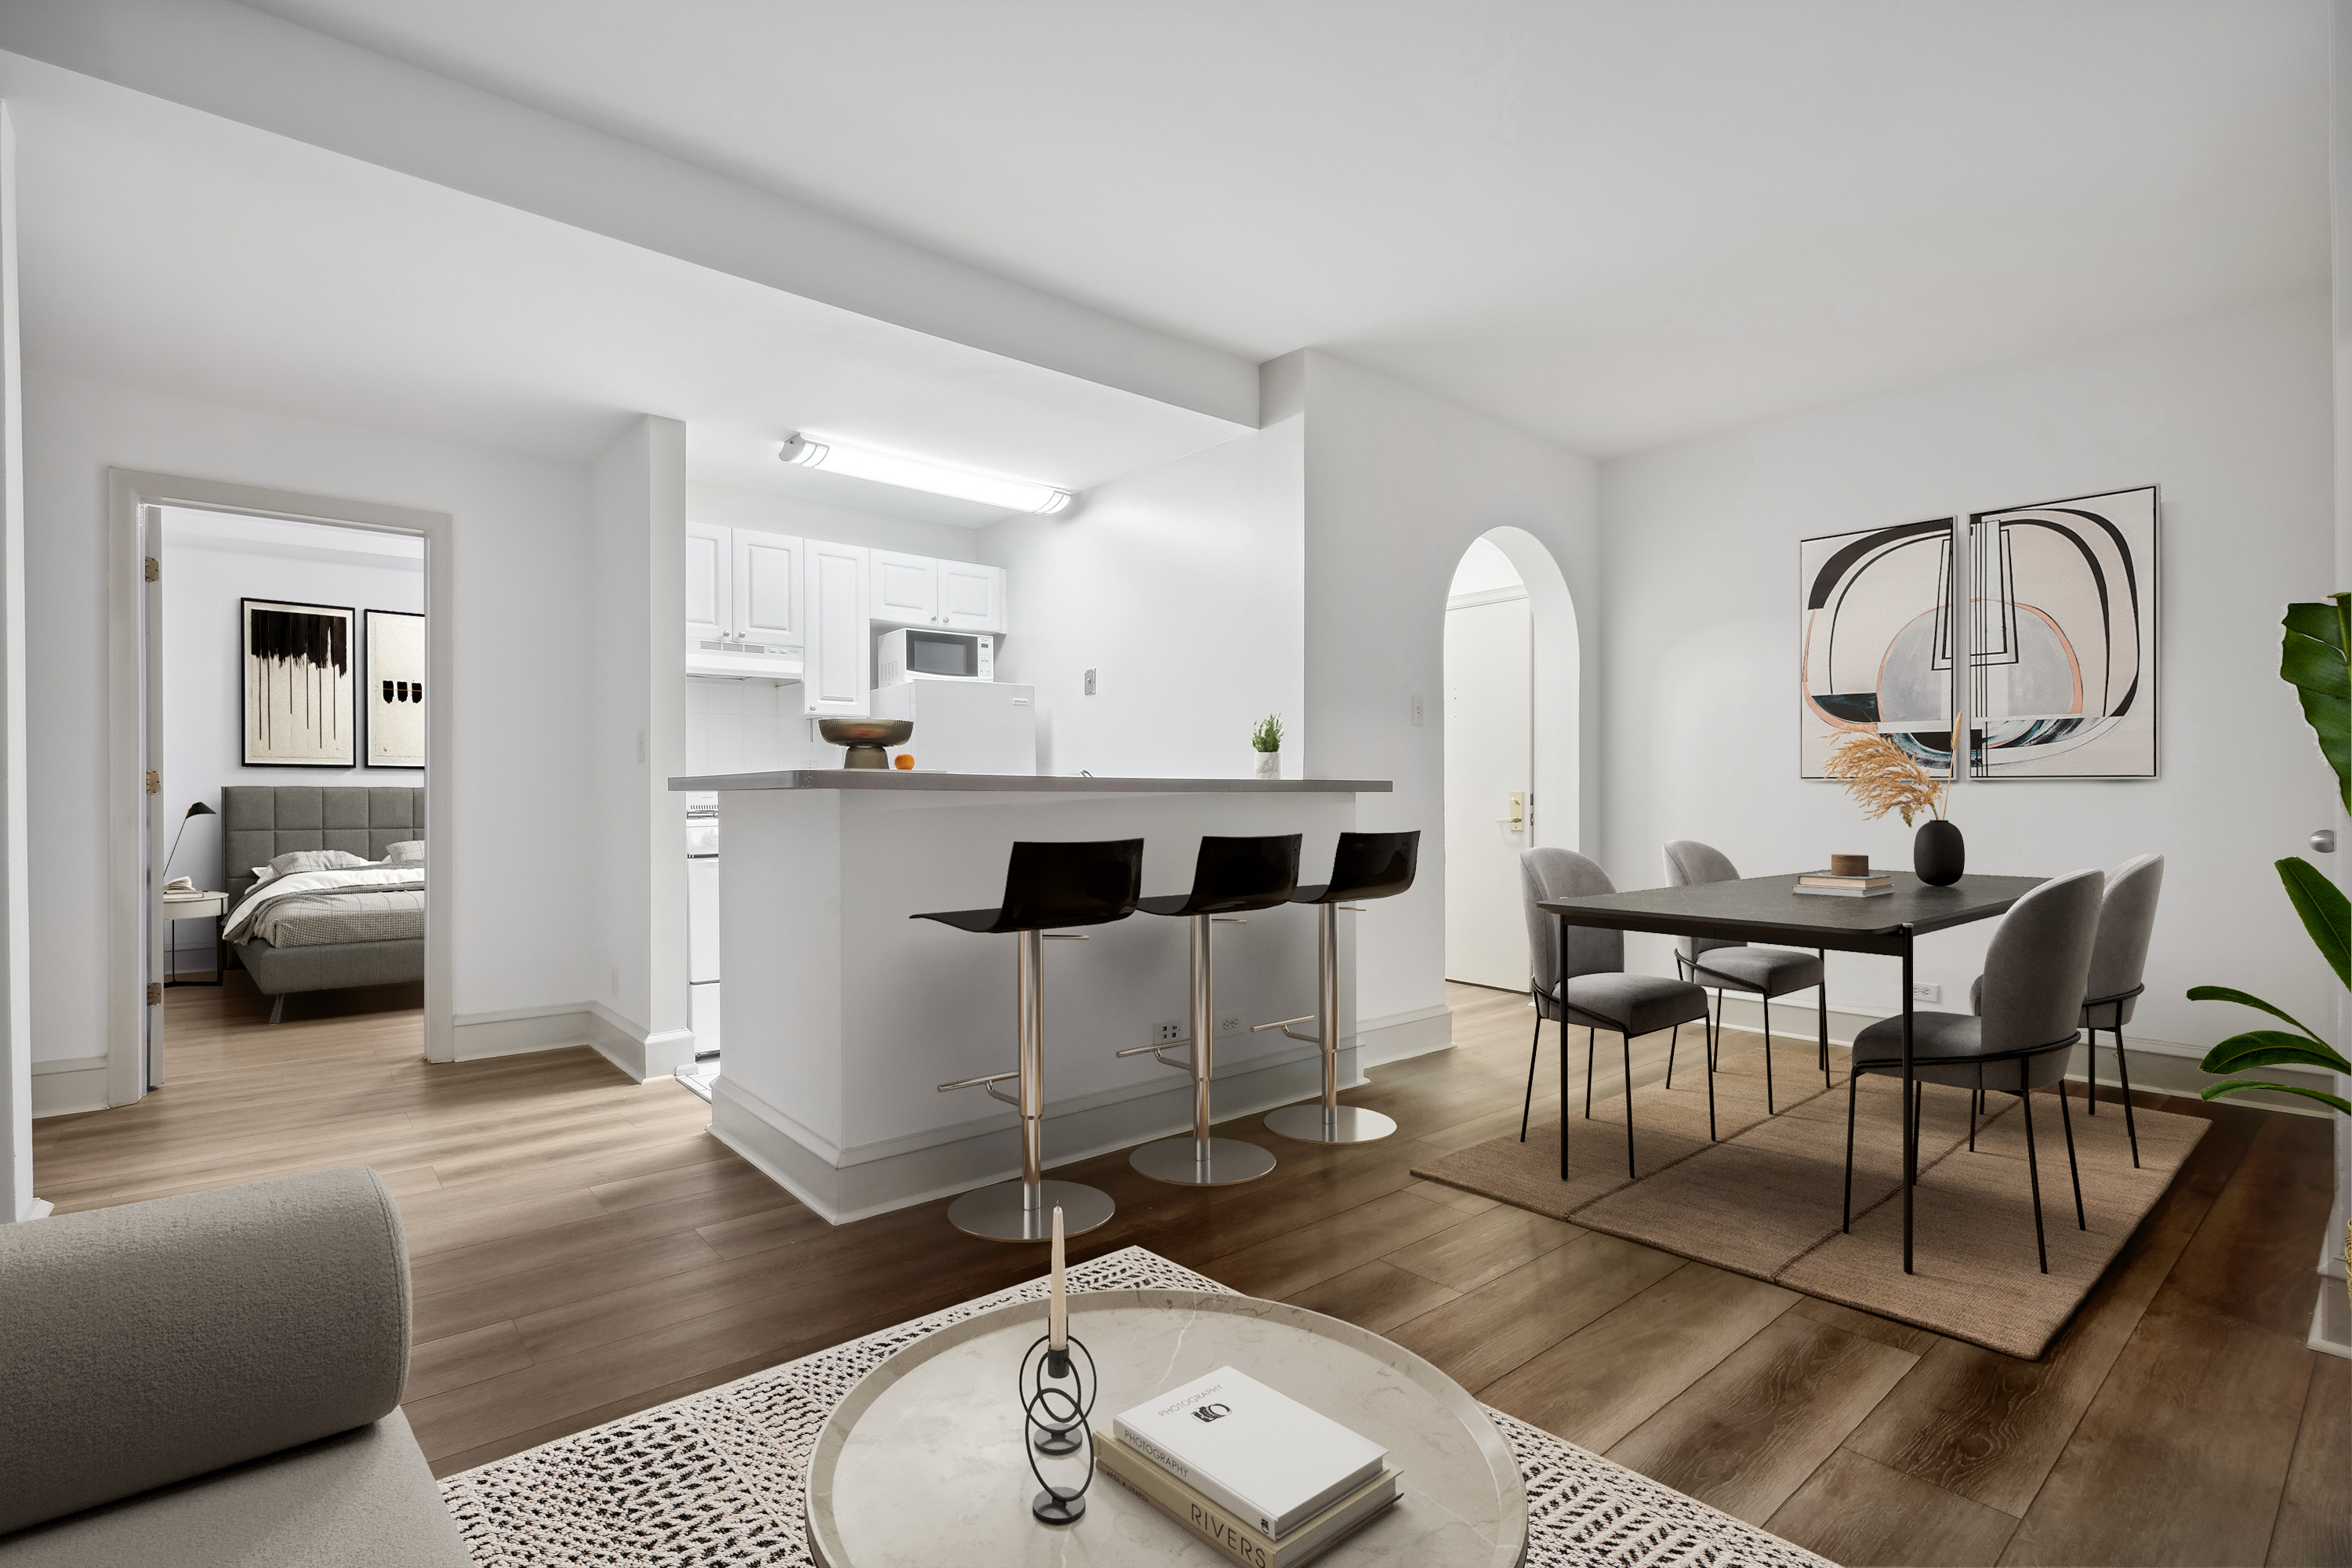 Renovated apartment with white cabinetry, kitchen island with seating for three.  View into bedroom on the left and dining table for 4 on the right.